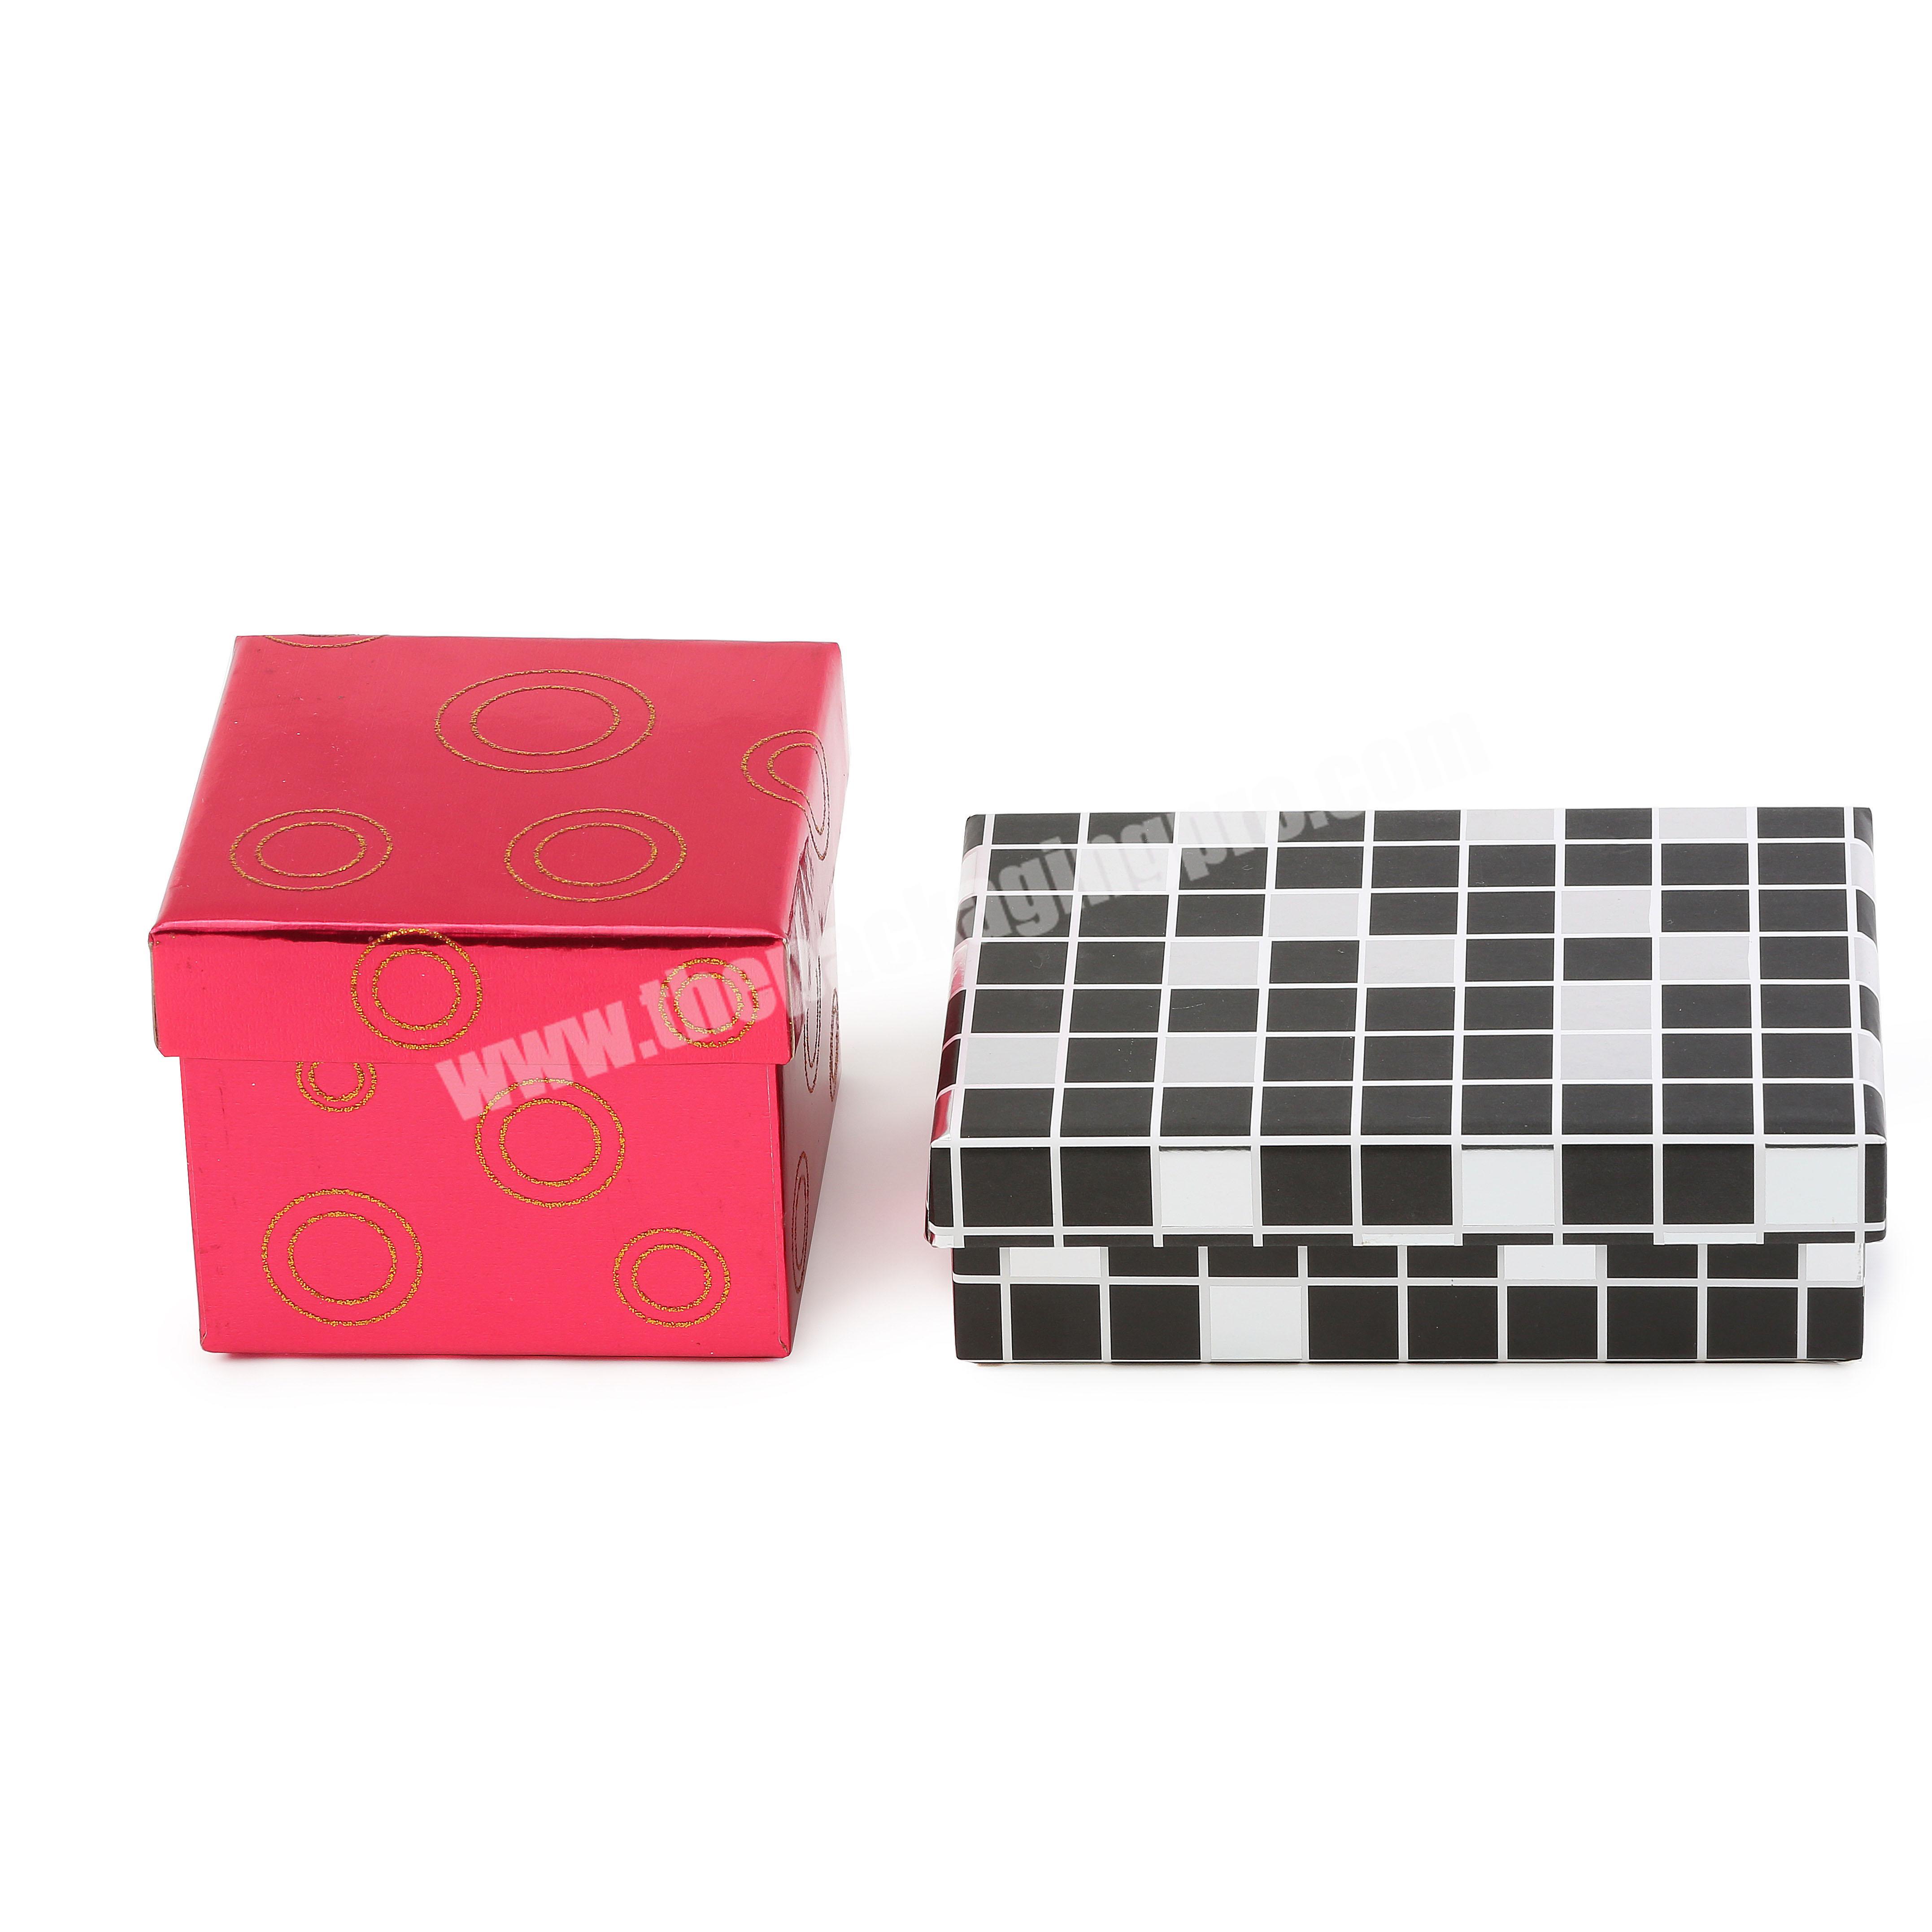 Different size rigid box in a whole set packing box from small to big size